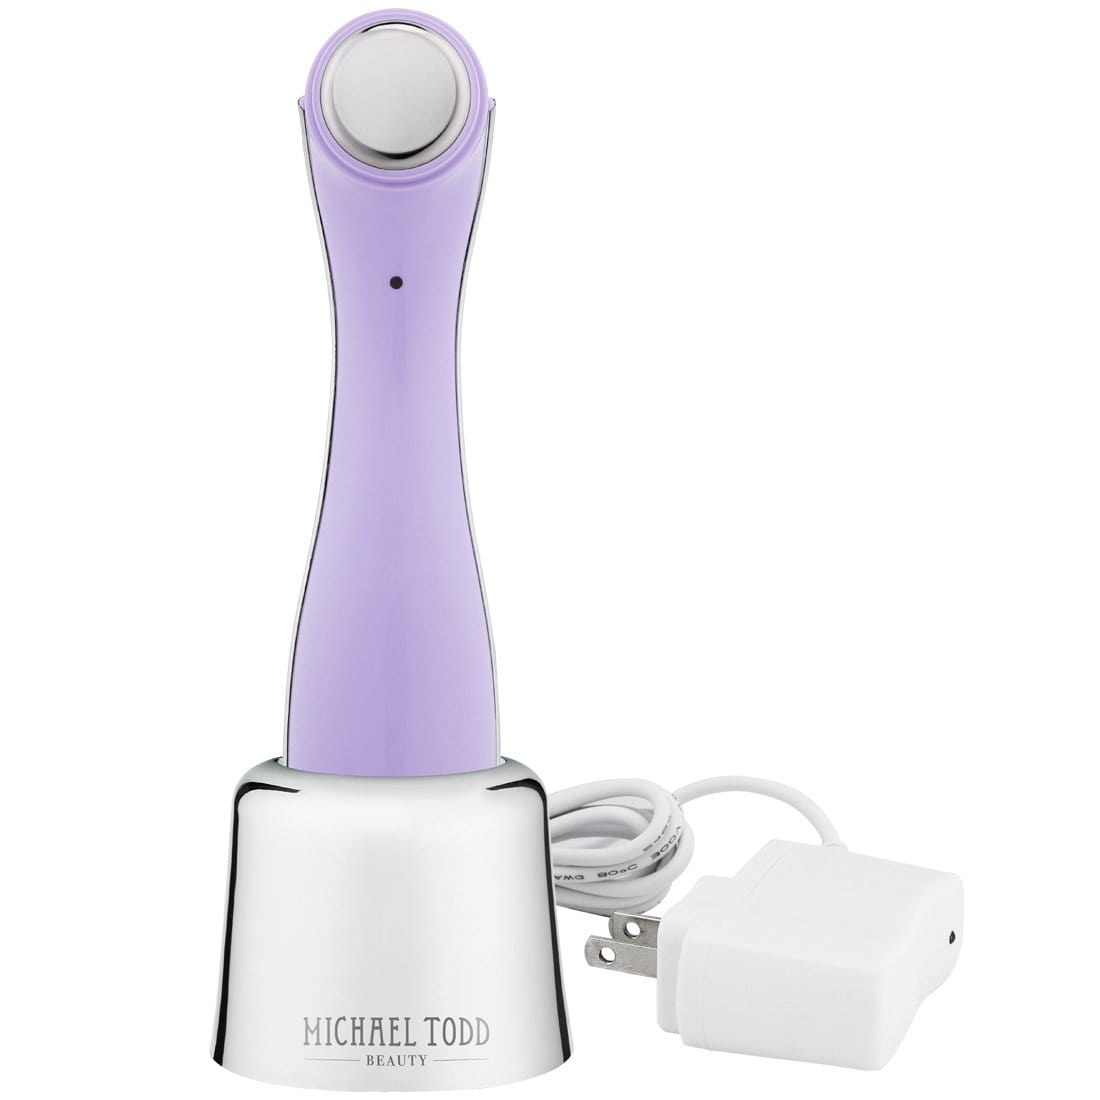 Michael Todd Beauty's Stay Balanced facial massager is a skincare delivery system that helps achieve a flawless look and clean complexion.